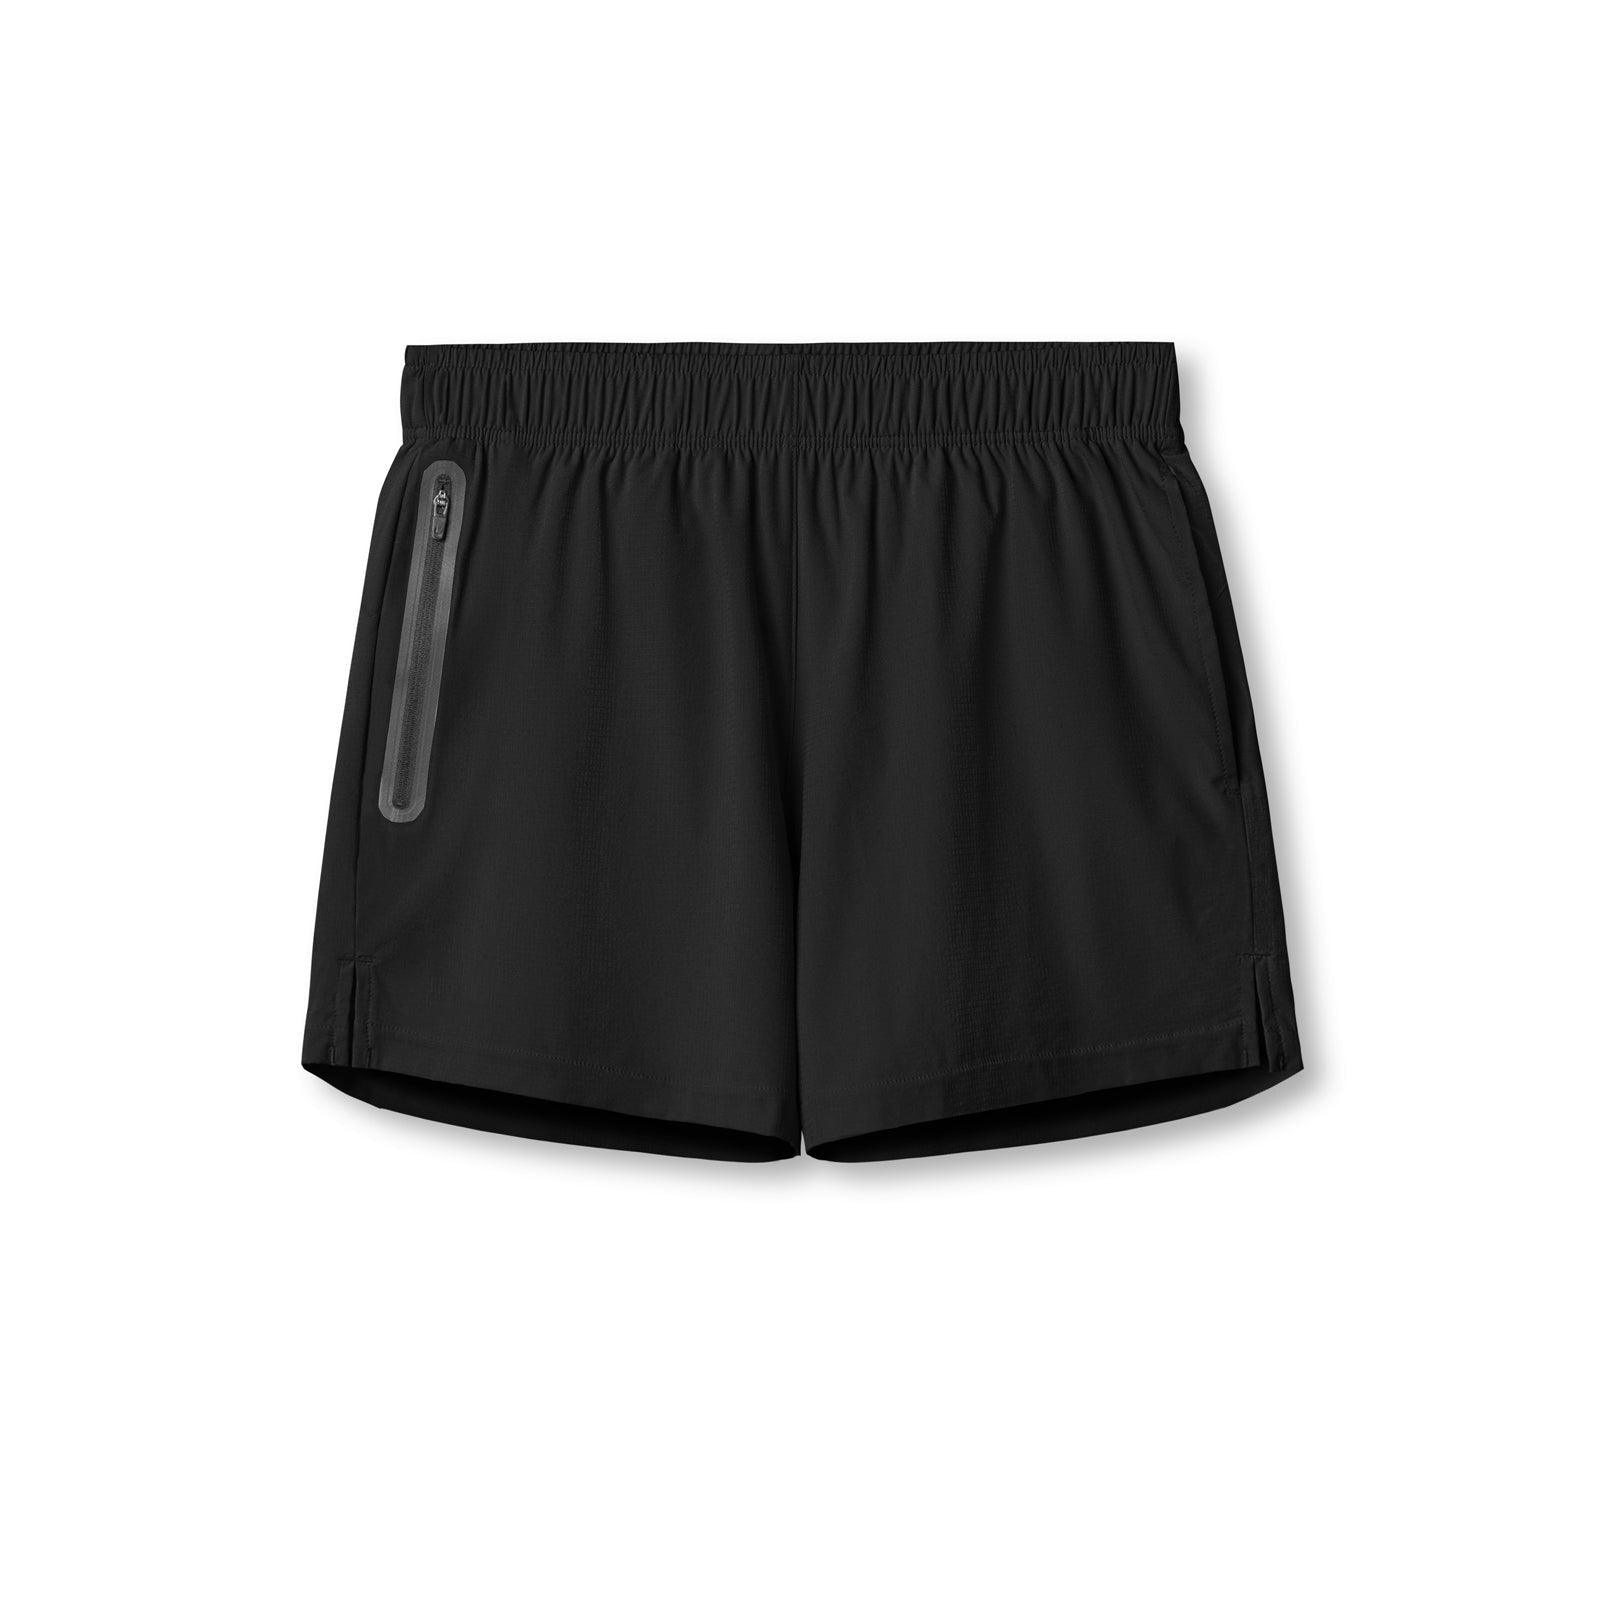 Spring And Summer New Men's Shorts - Nioor